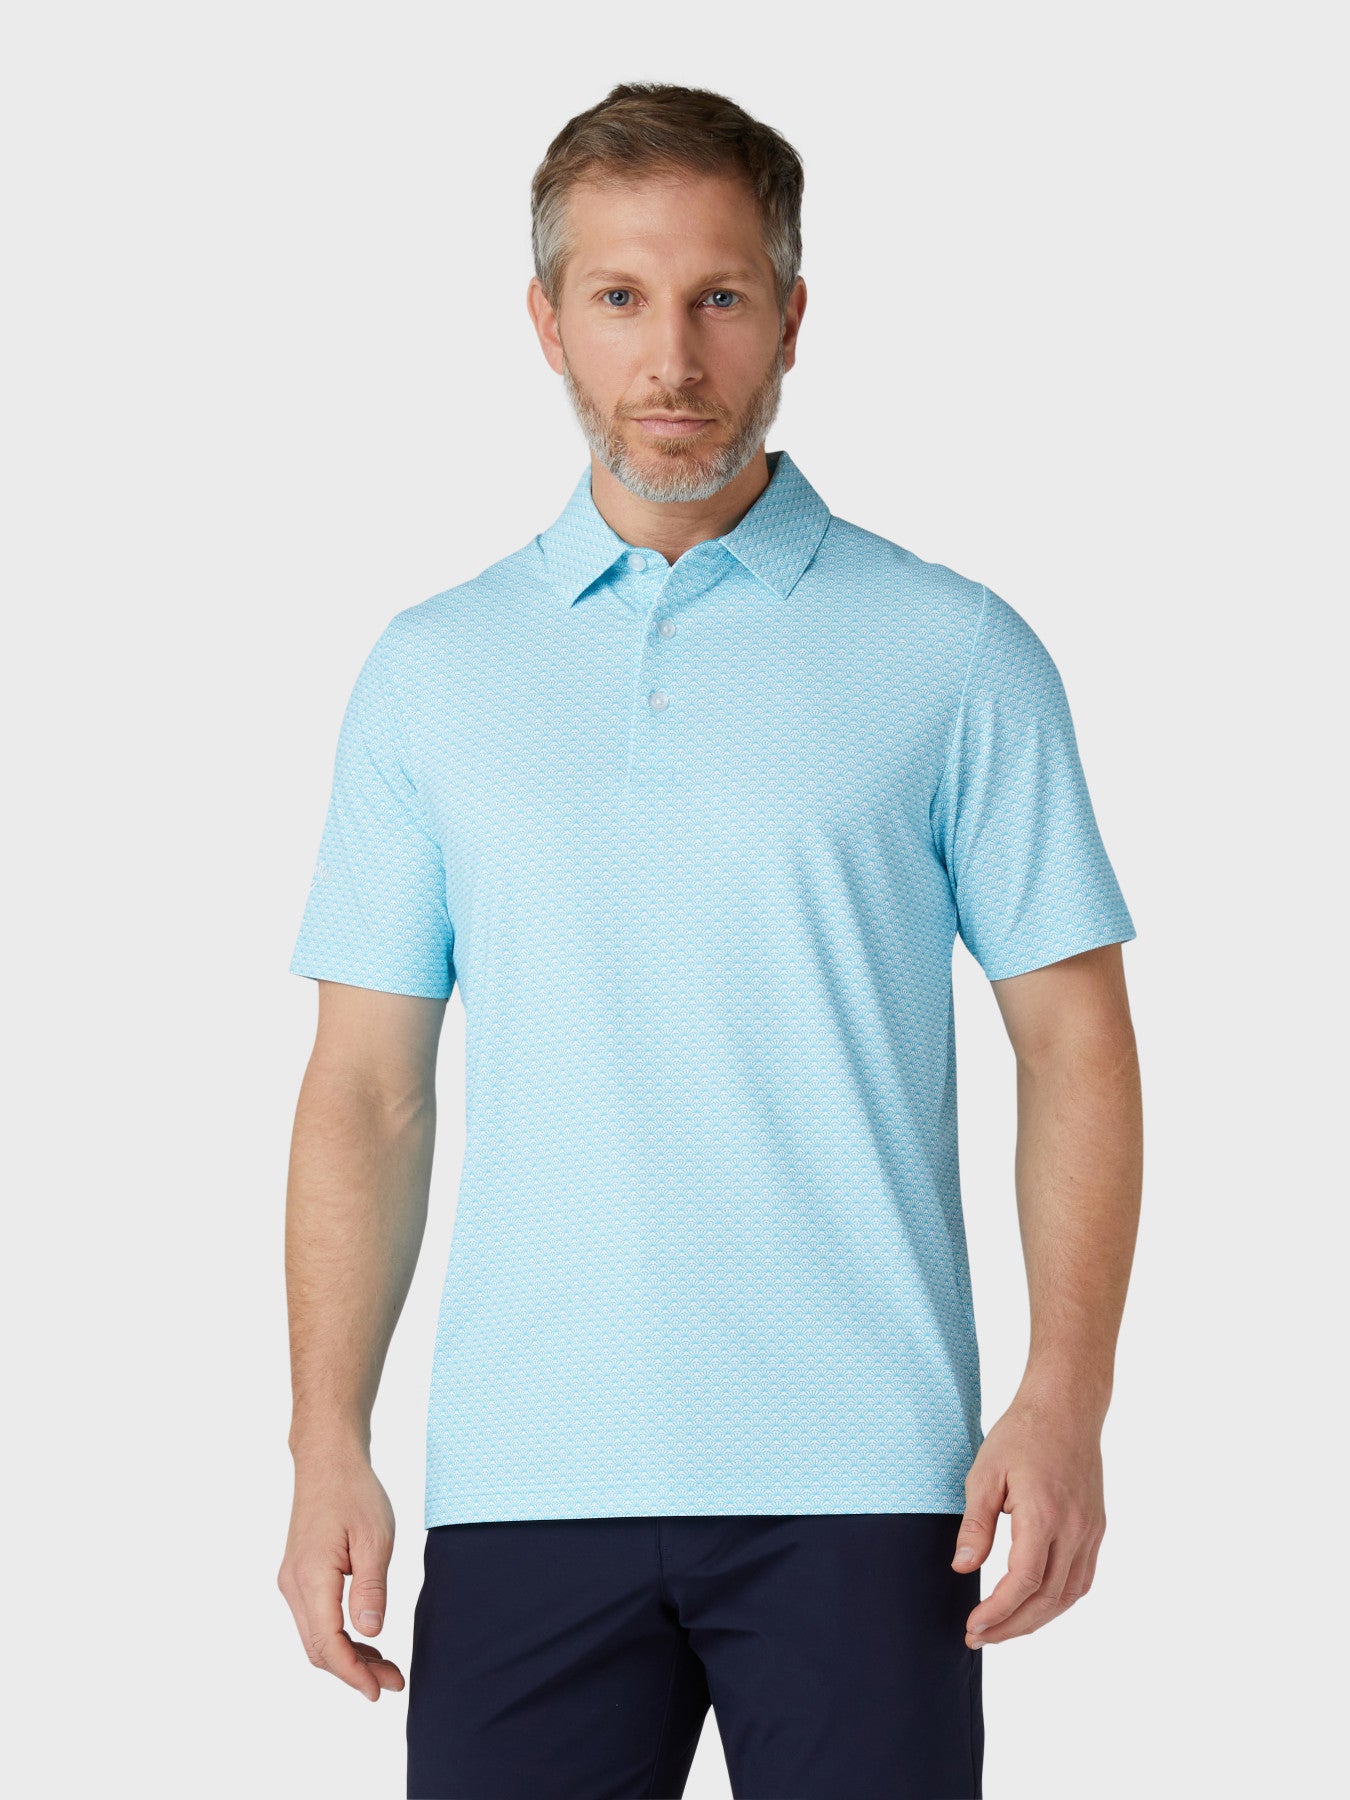 View Mens All Over Tradmark Print Polo In Scuba Blue information